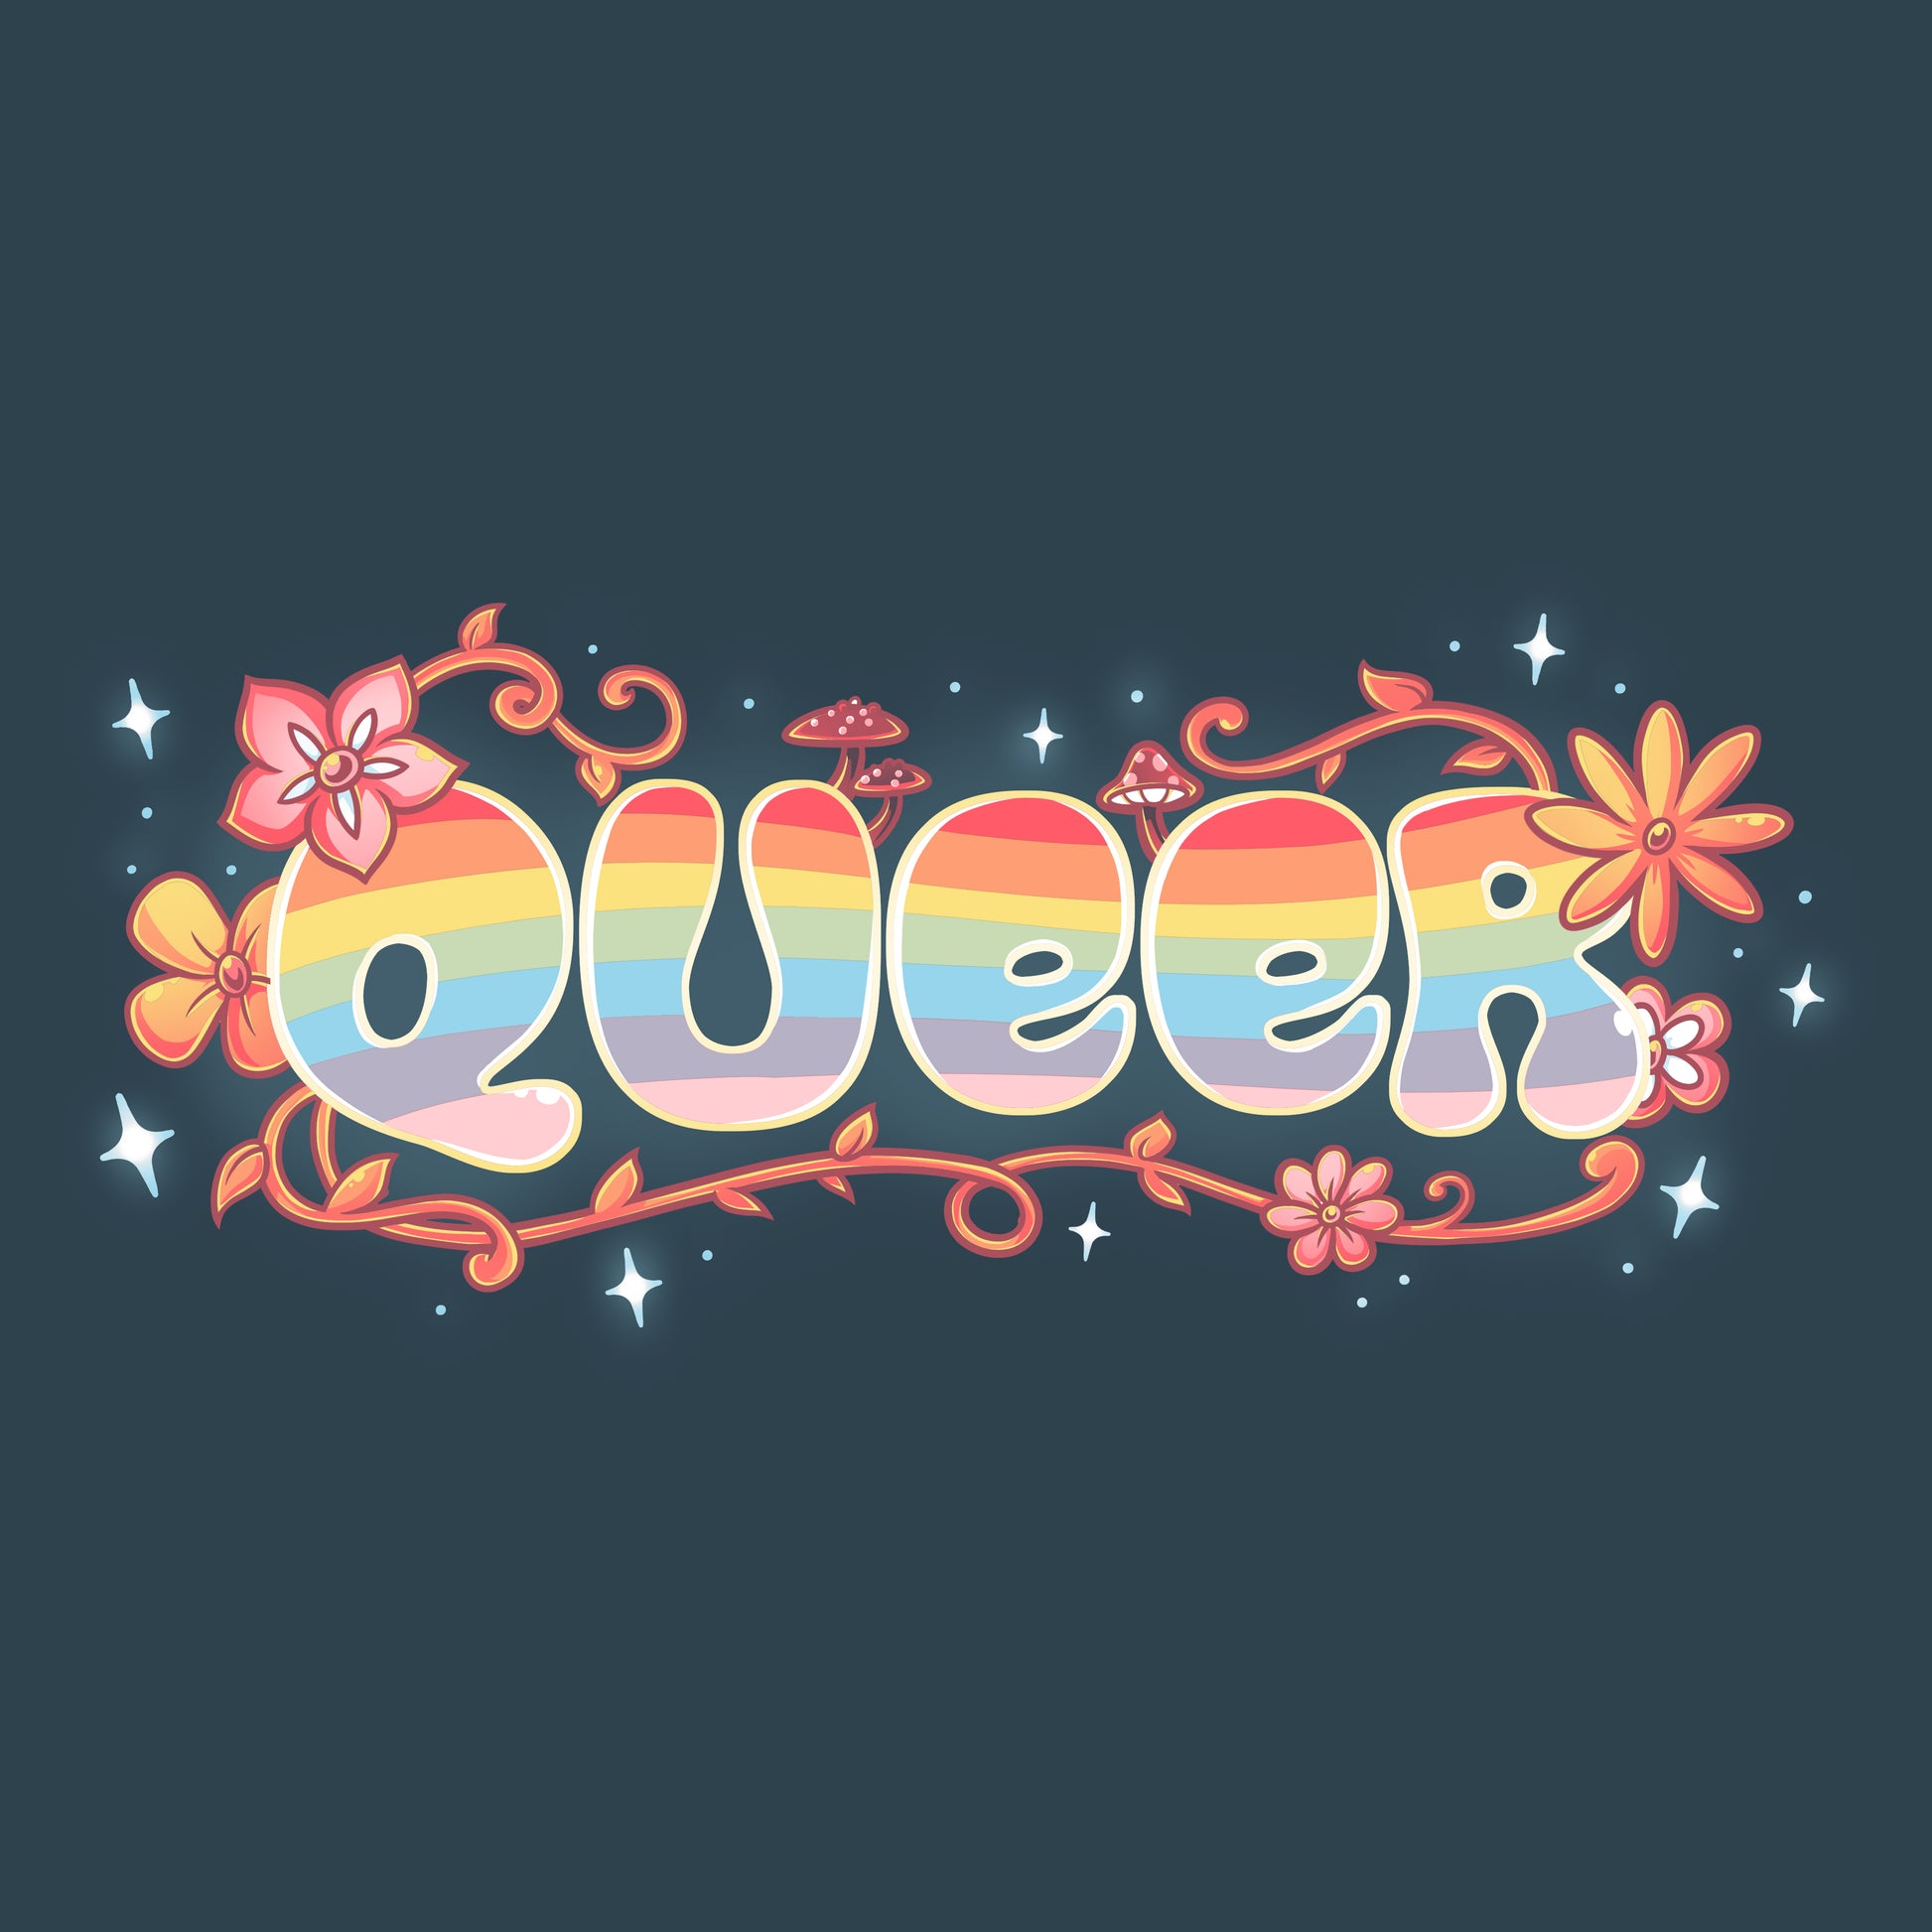 Denim blue Queer t-shirt featuring the word "queer" in colorful lettering on a dark background - by TeeTurtle.